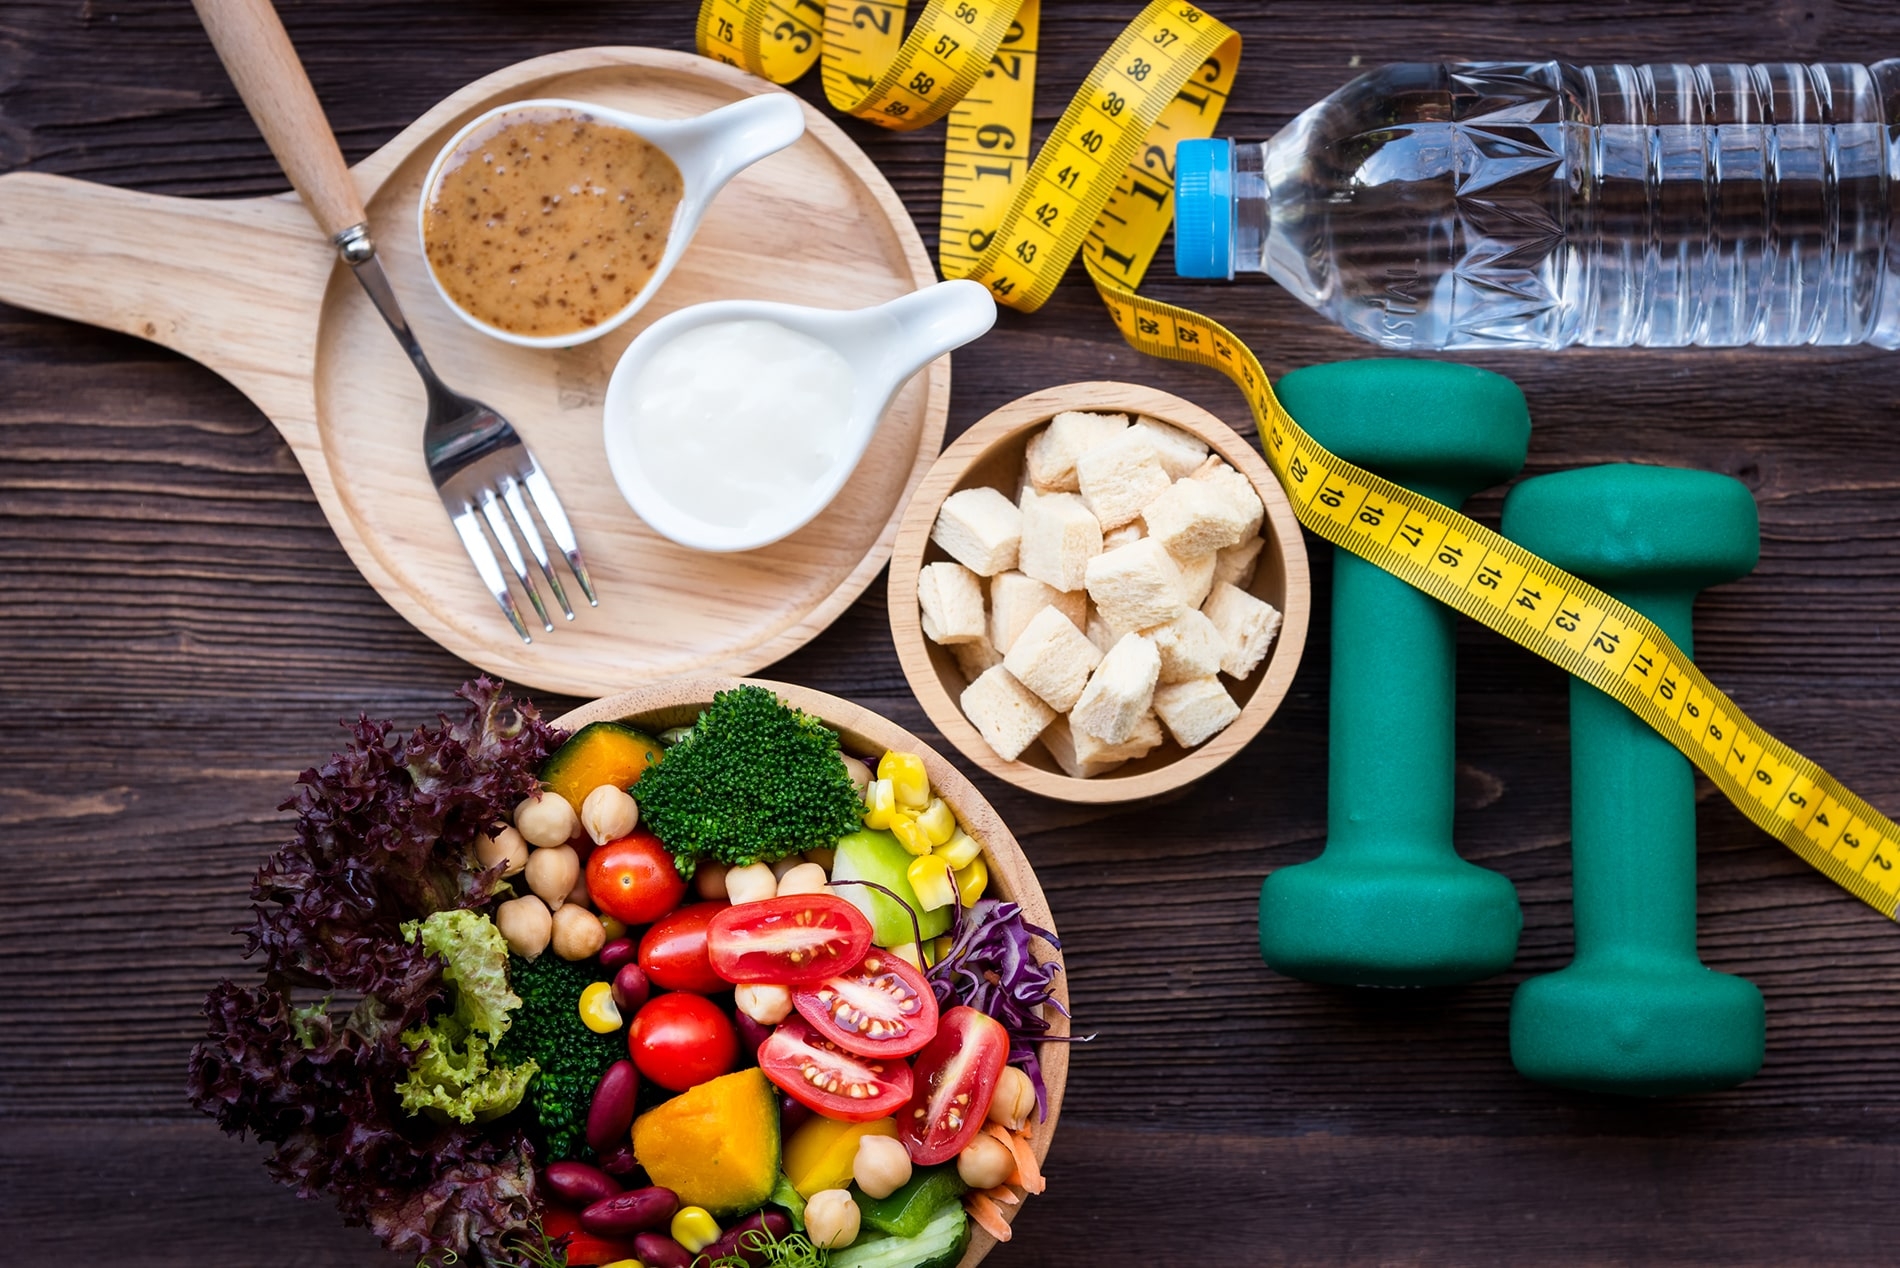 Global Sports Nutrition Market Is Expected To Grow Exponentially Due To Growing Numbers Of Fitness Centers & Health Clubs